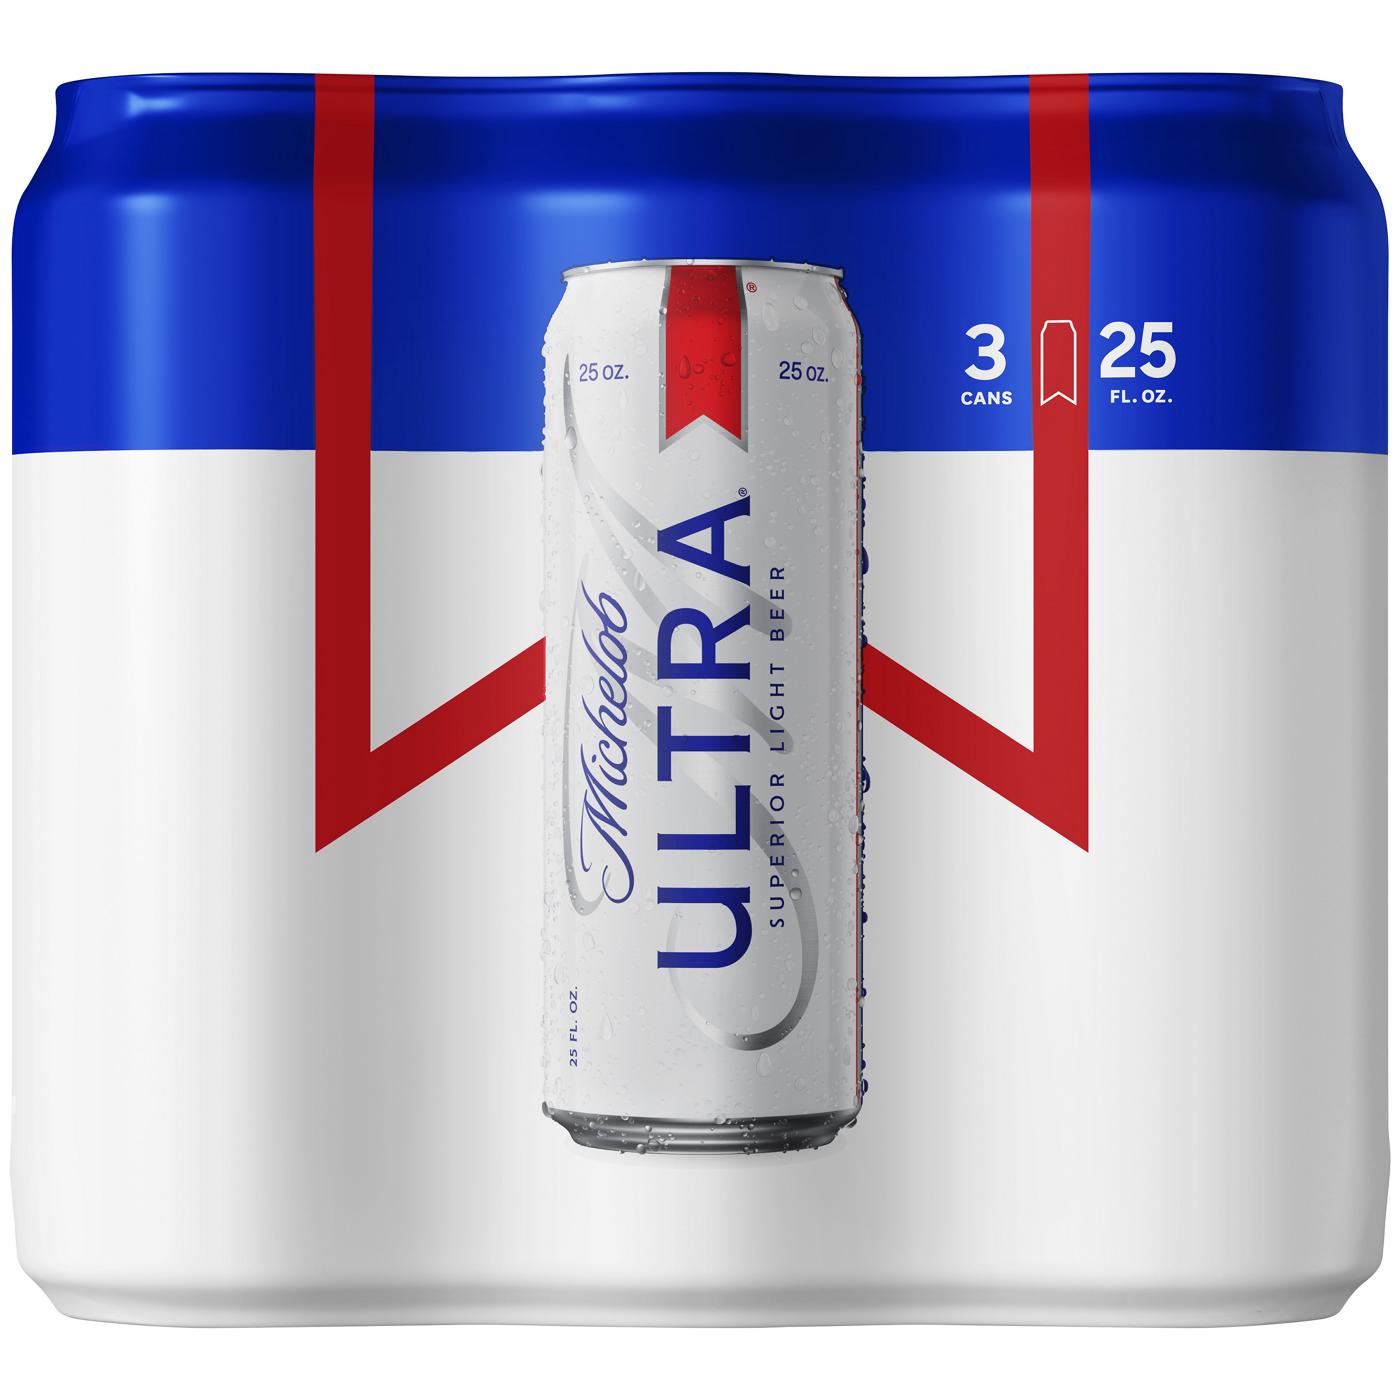 Michelob Ultra Light Beer 25 oz Cans